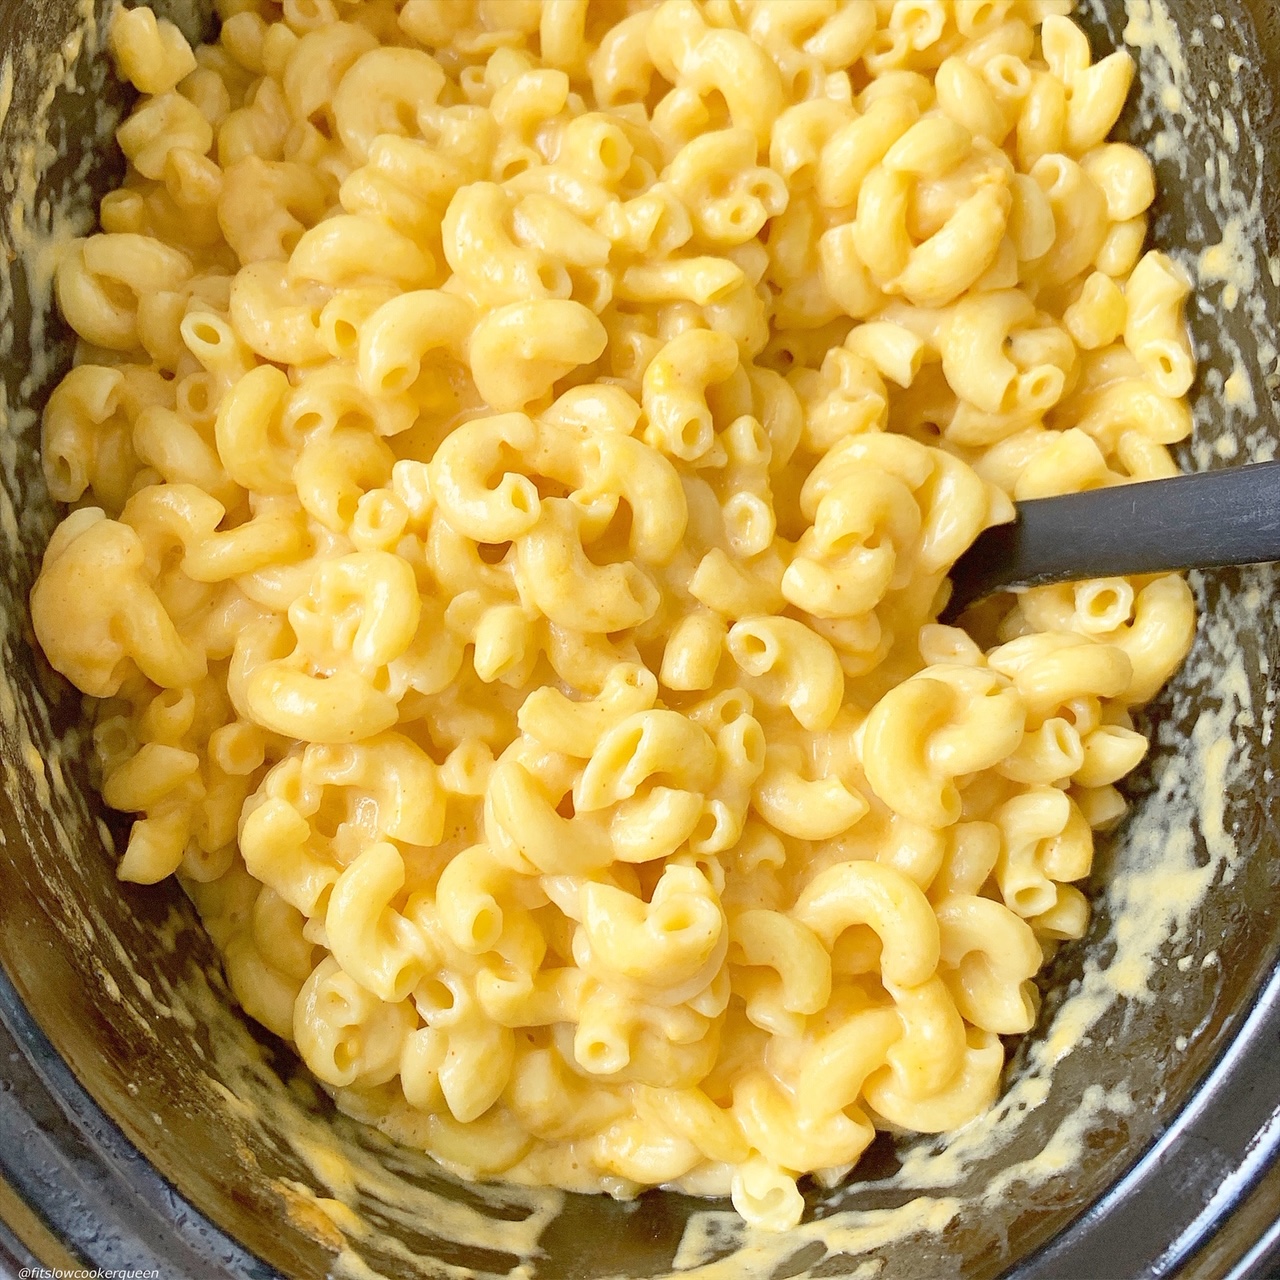 This mac & cheese recipe only uses a few ingredients one of which is uncooked macaroni elbow. Make this easy comfort food in your slow cooker.